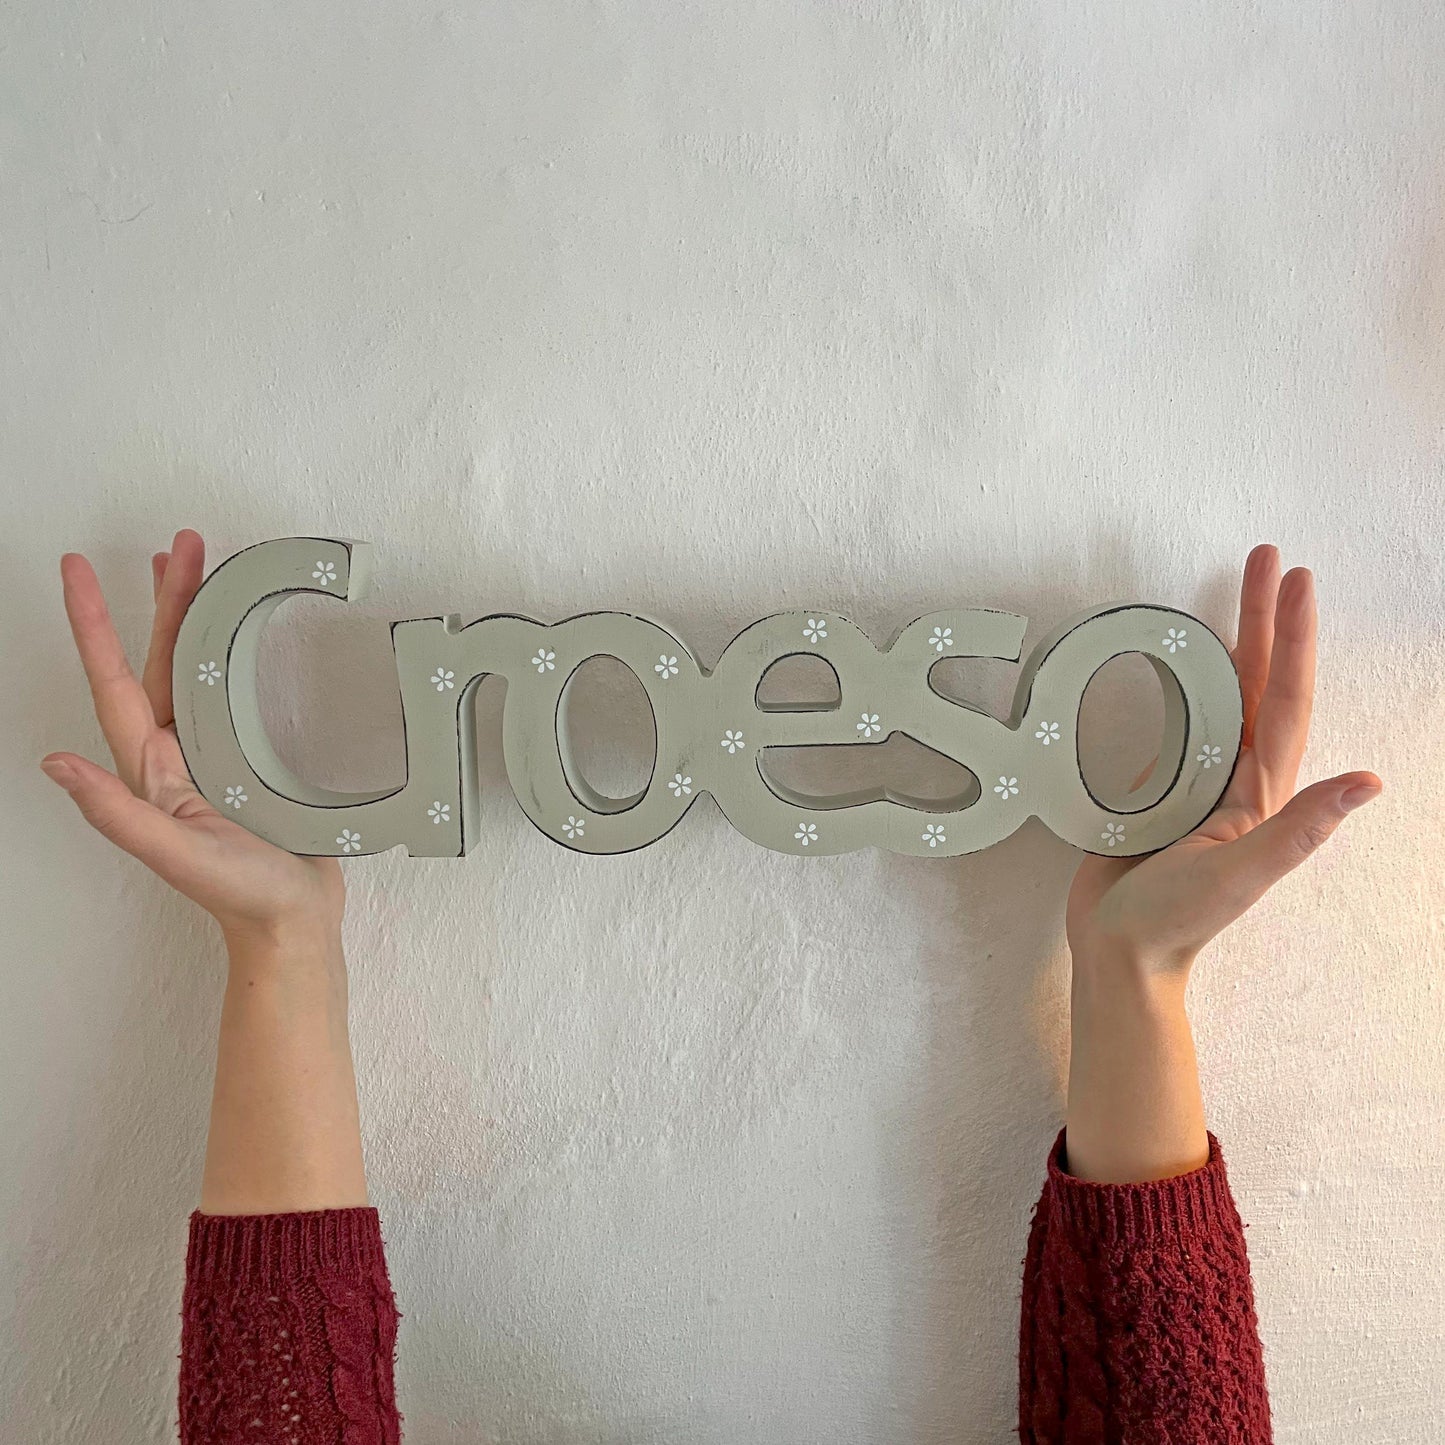 Decoration - Wooden Word - Croeso / Welcome